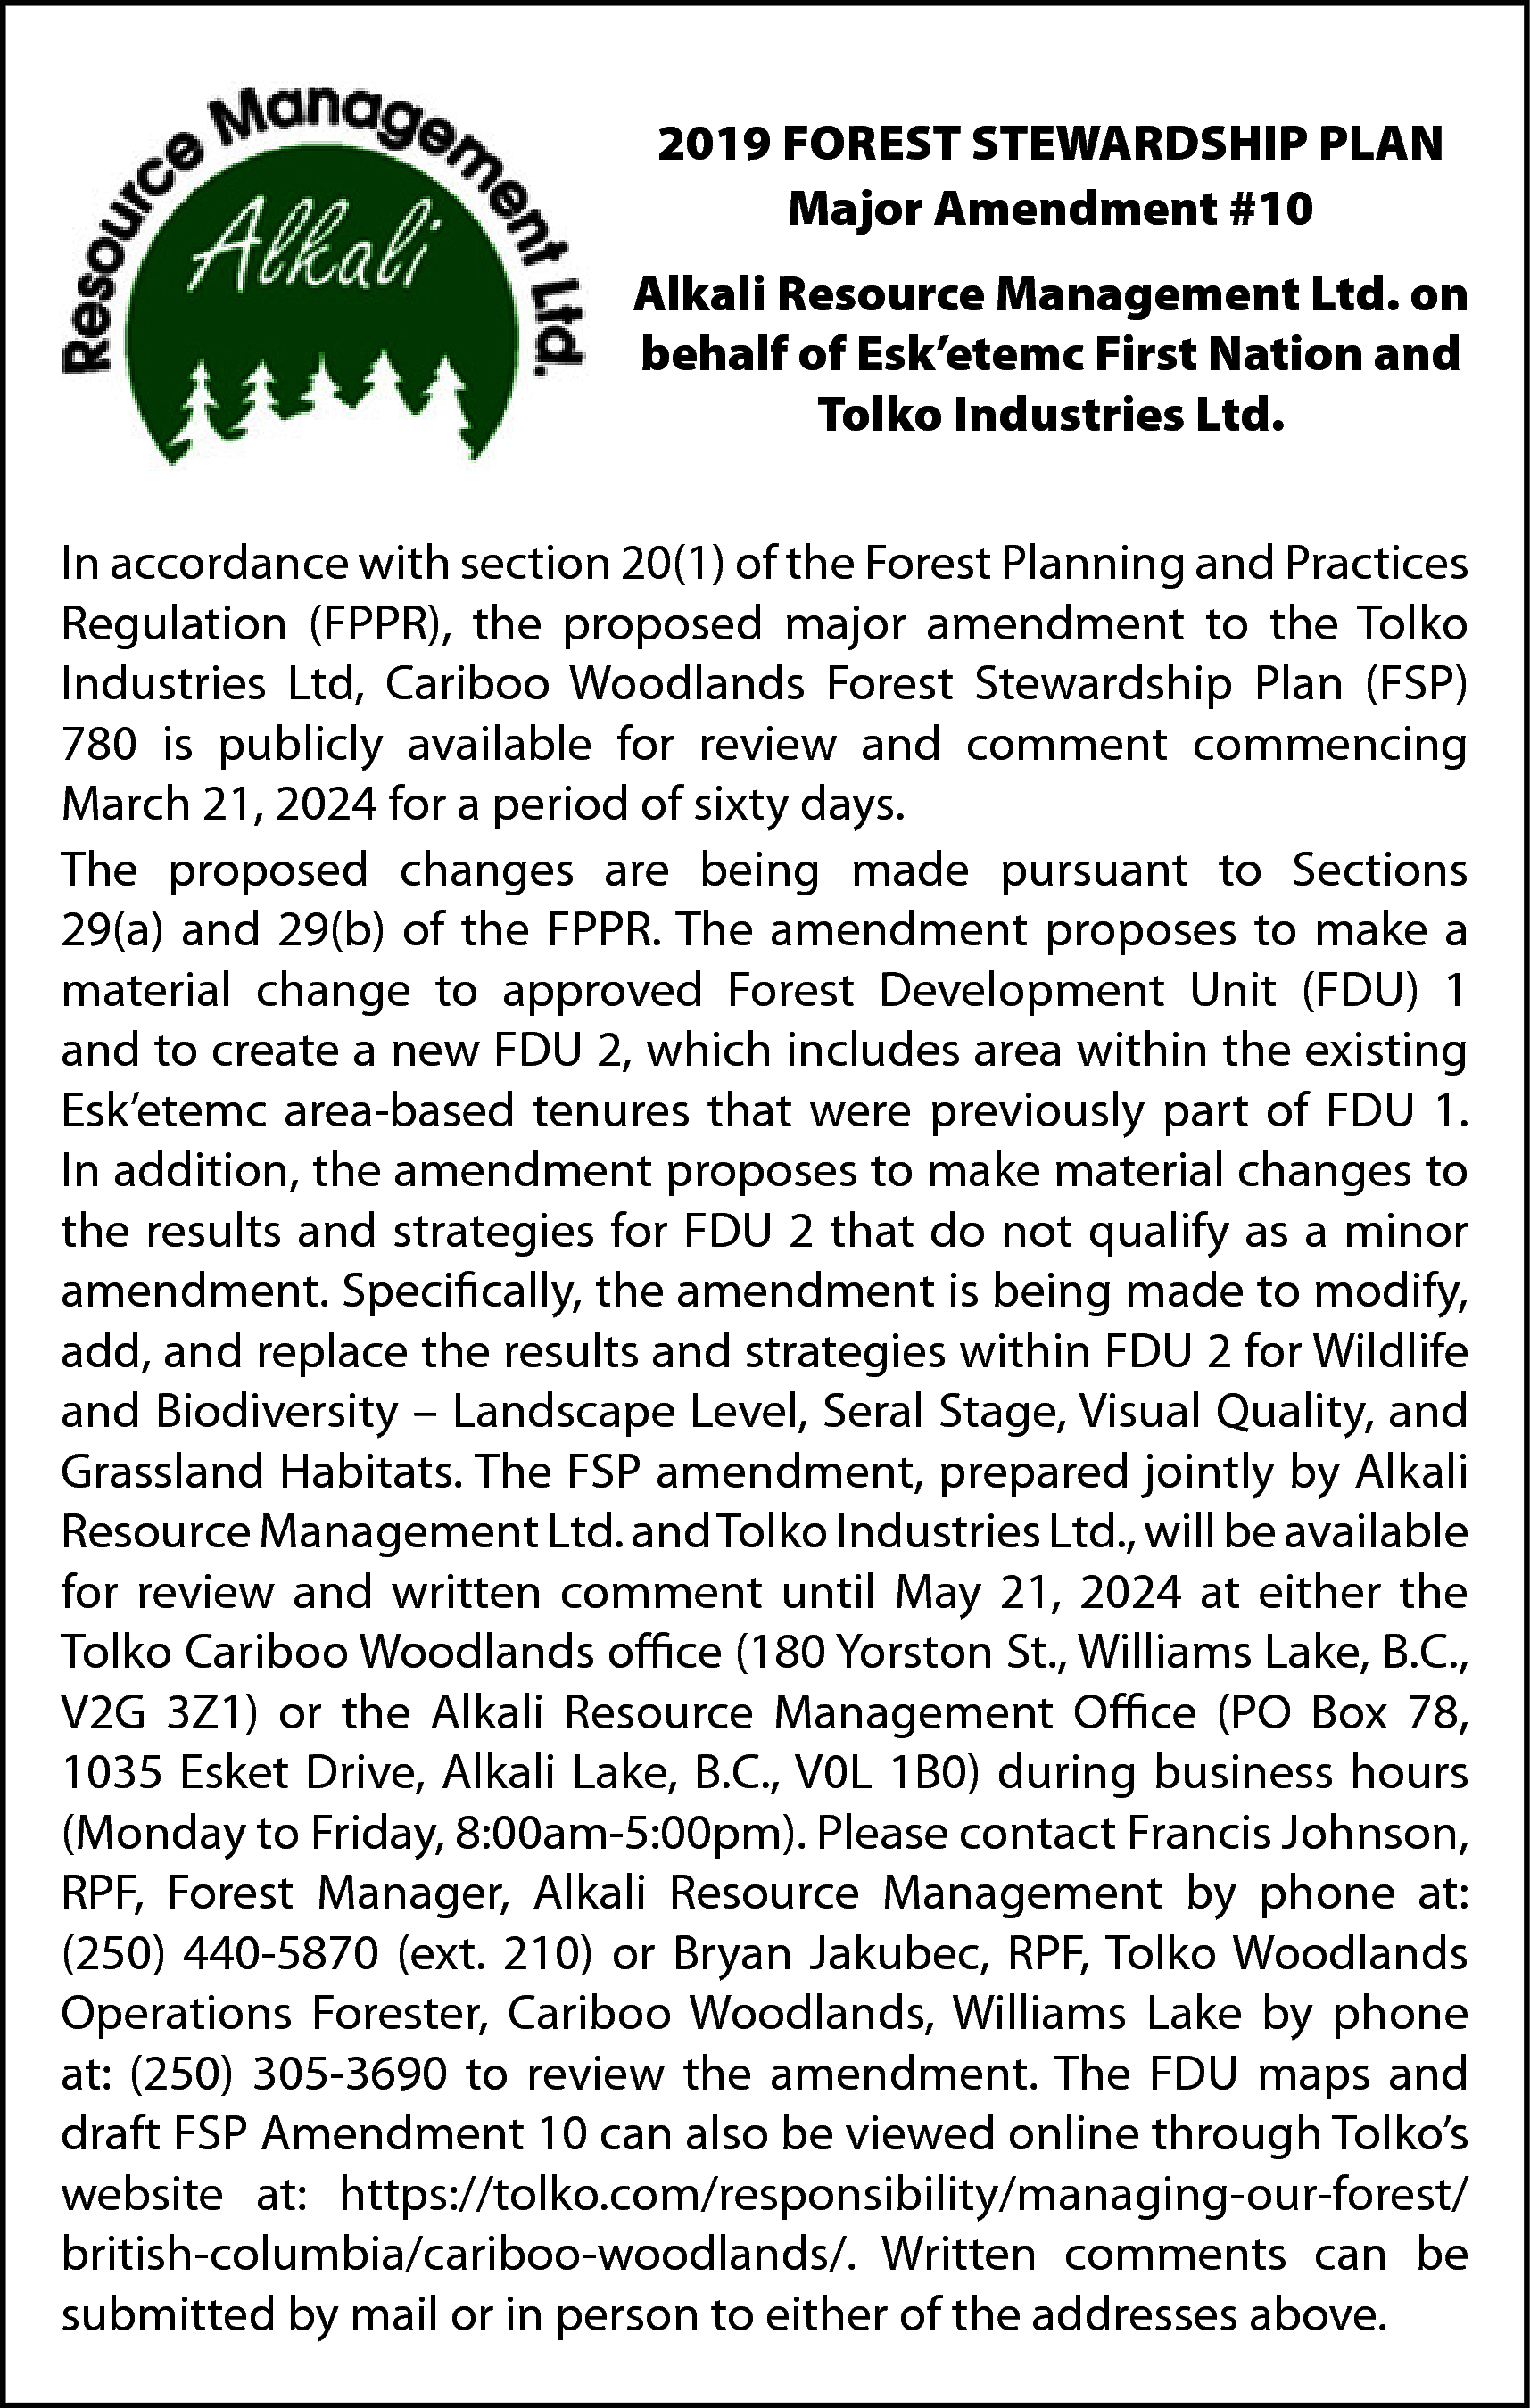 2019 FOREST STEWARDSHIP PLAN <br>Major  2019 FOREST STEWARDSHIP PLAN  Major Amendment #10  Alkali Resource Management Ltd. on  behalf of Esk’etemc First Nation and  Tolko Industries Ltd.  In accordance with section 20(1) of the Forest Planning and Practices  Regulation (FPPR), the proposed major amendment to the Tolko  Industries Ltd, Cariboo Woodlands Forest Stewardship Plan (FSP)  780 is publicly available for review and comment commencing  March 21, 2024 for a period of sixty days.  The proposed changes are being made pursuant to Sections  29(a) and 29(b) of the FPPR. The amendment proposes to make a  material change to approved Forest Development Unit (FDU) 1  and to create a new FDU 2, which includes area within the existing  Esk’etemc area-based tenures that were previously part of FDU 1.  In addition, the amendment proposes to make material changes to  the results and strategies for FDU 2 that do not qualify as a minor  amendment. Specifically, the amendment is being made to modify,  add, and replace the results and strategies within FDU 2 for Wildlife  and Biodiversity – Landscape Level, Seral Stage, Visual Quality, and  Grassland Habitats. The FSP amendment, prepared jointly by Alkali  Resource Management Ltd. and Tolko Industries Ltd., will be available  for review and written comment until May 21, 2024 at either the  Tolko Cariboo Woodlands office (180 Yorston St., Williams Lake, B.C.,  V2G 3Z1) or the Alkali Resource Management Office (PO Box 78,  1035 Esket Drive, Alkali Lake, B.C., V0L 1B0) during business hours  (Monday to Friday, 8:00am-5:00pm). Please contact Francis Johnson,  RPF, Forest Manager, Alkali Resource Management by phone at:  (250) 440-5870 (ext. 210) or Bryan Jakubec, RPF, Tolko Woodlands  Operations Forester, Cariboo Woodlands, Williams Lake by phone  at: (250) 305-3690 to review the amendment. The FDU maps and  draft FSP Amendment 10 can also be viewed online through Tolko’s  website at: https://tolko.com/responsibility/managing-our-forest/  british-columbia/cariboo-woodlands/. Written comments can be  submitted by mail or in person to either of the addresses above.    